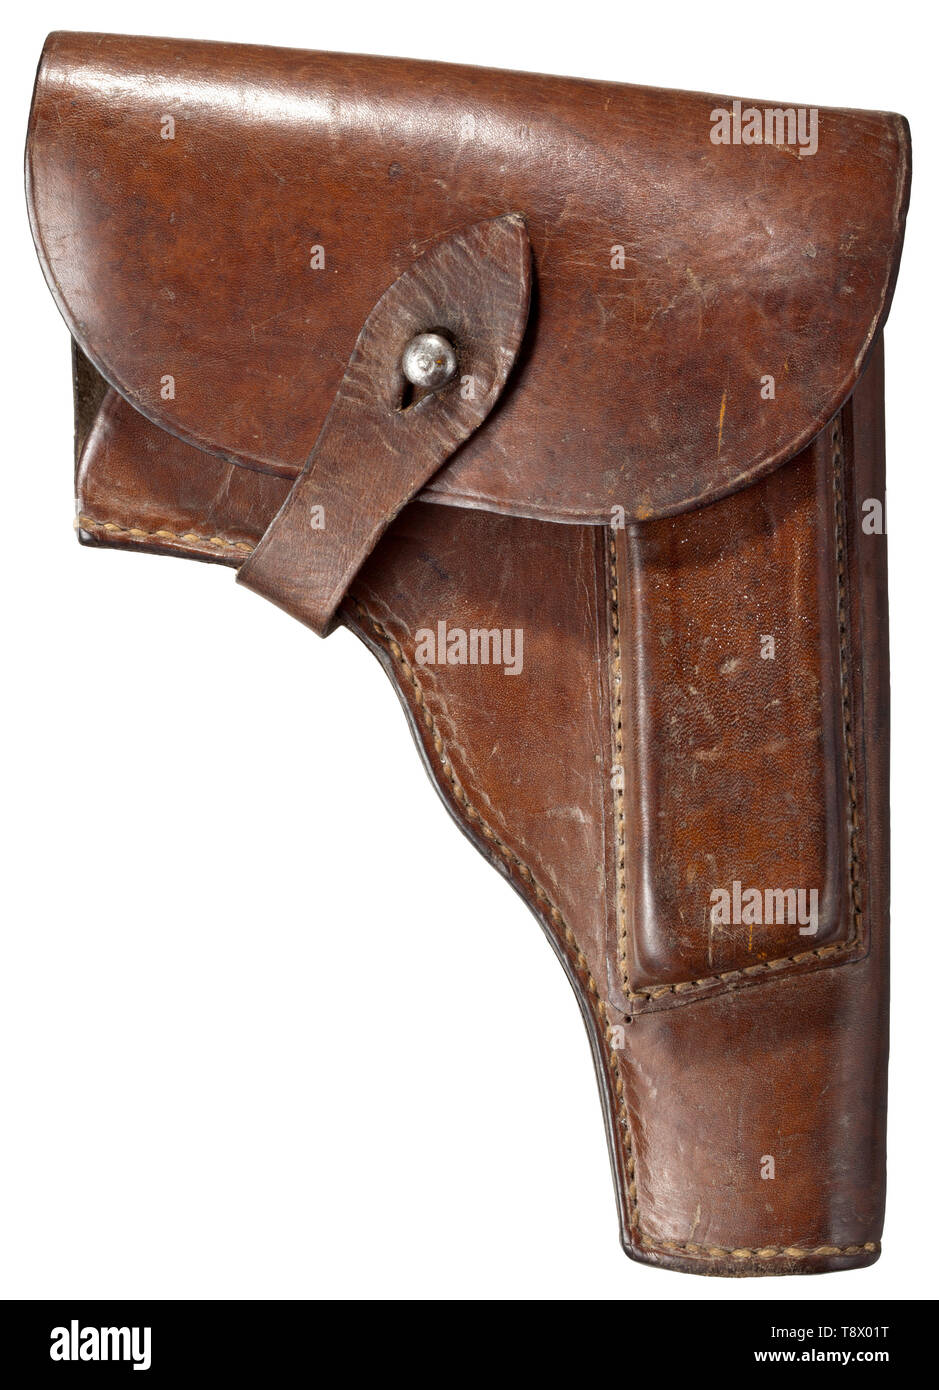 A holster for the VIS Mod. 35, Radom ink stamp in the cover 'bnz 1944 / P.35(p)', manufacturer Steyr-Daimler-Puch AG, Steyr Sturdy dark-brown cowhide with signs of usage. Magazine pocket in front. Steel closure button. Stitching and straps in order. historic, historical, 20th century, Editorial-Use-Only Stock Photo